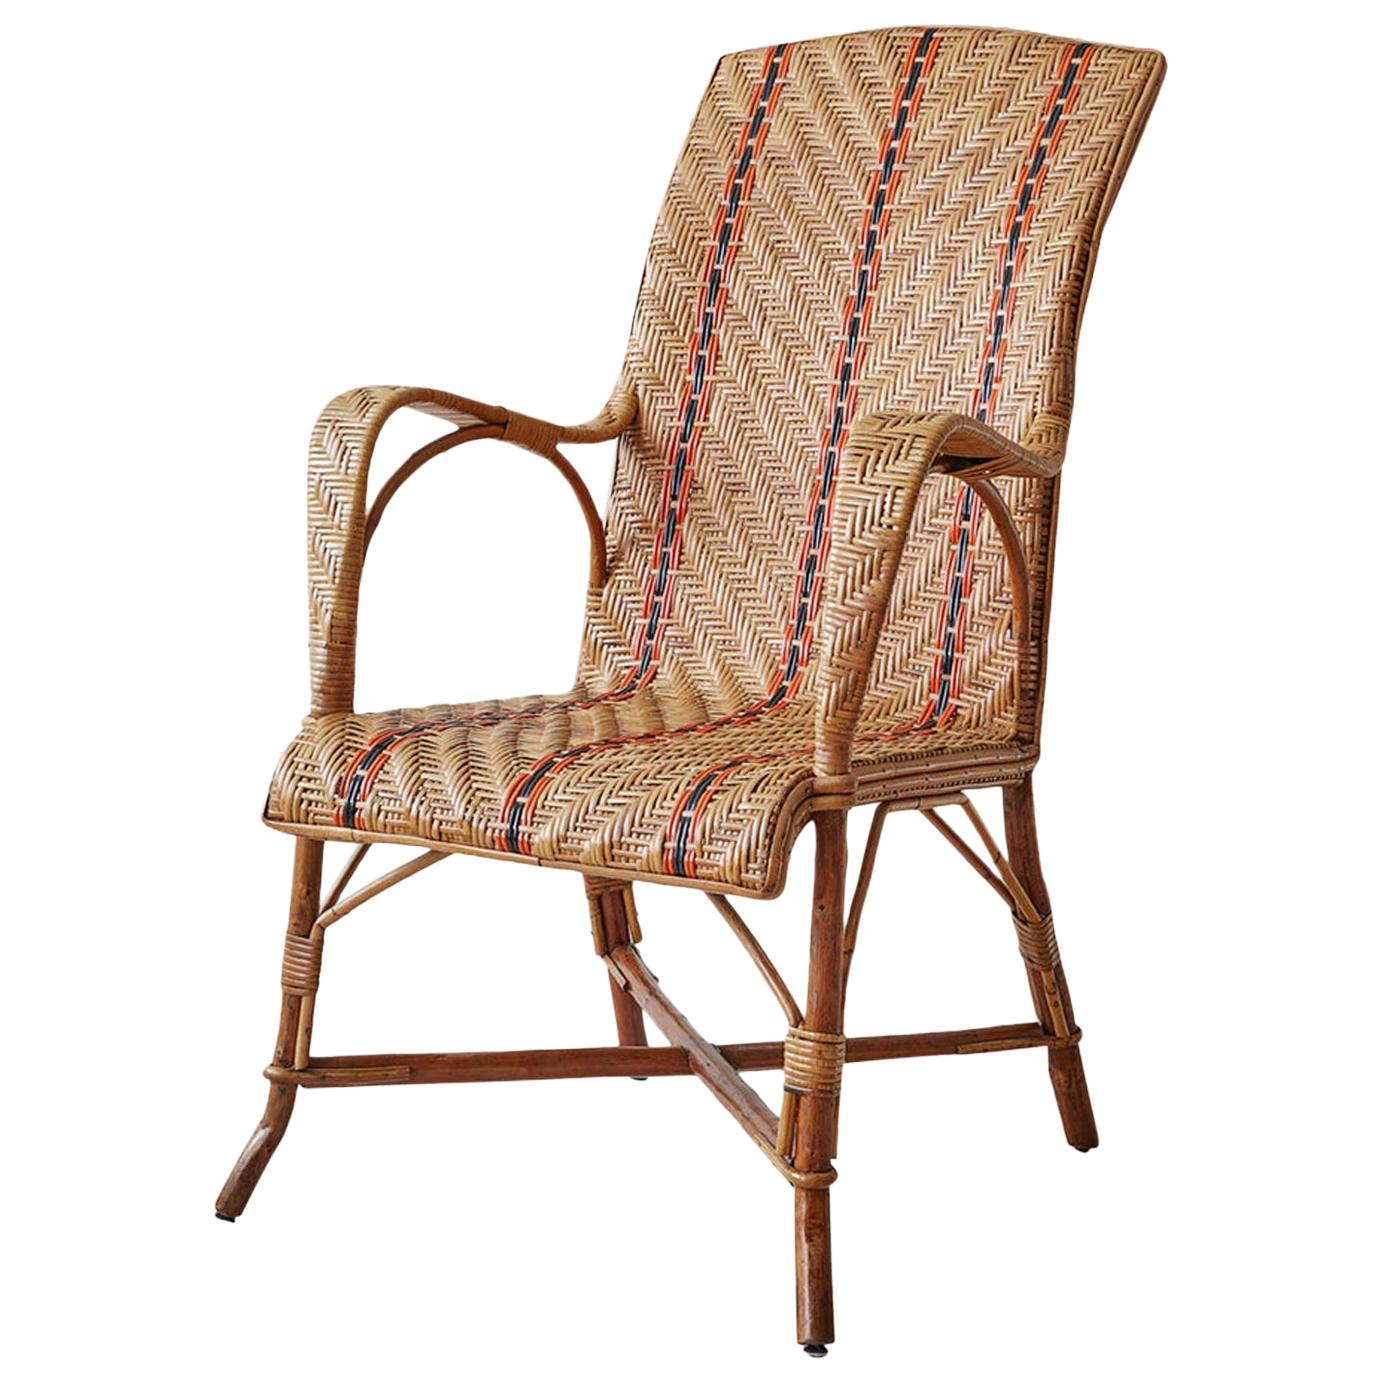 Vintage Rattan Armchair with Orange Stripes and Woven Details, France, 1930s